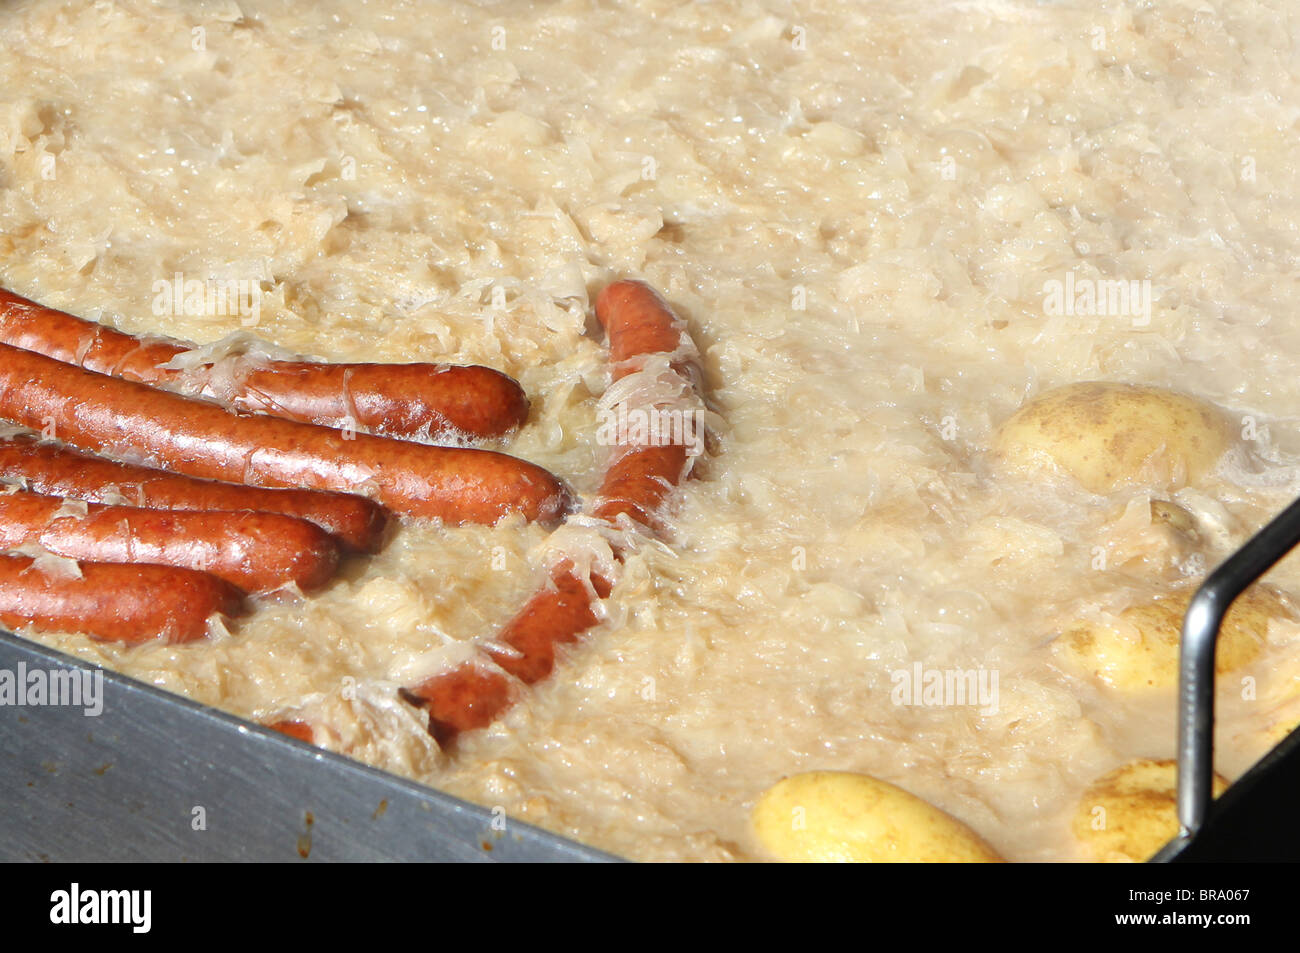 A large pan of potato rosti and bratwurst sausages cooking outside in Switzerland. This image was taken at the ski resort of Kle Stock Photo